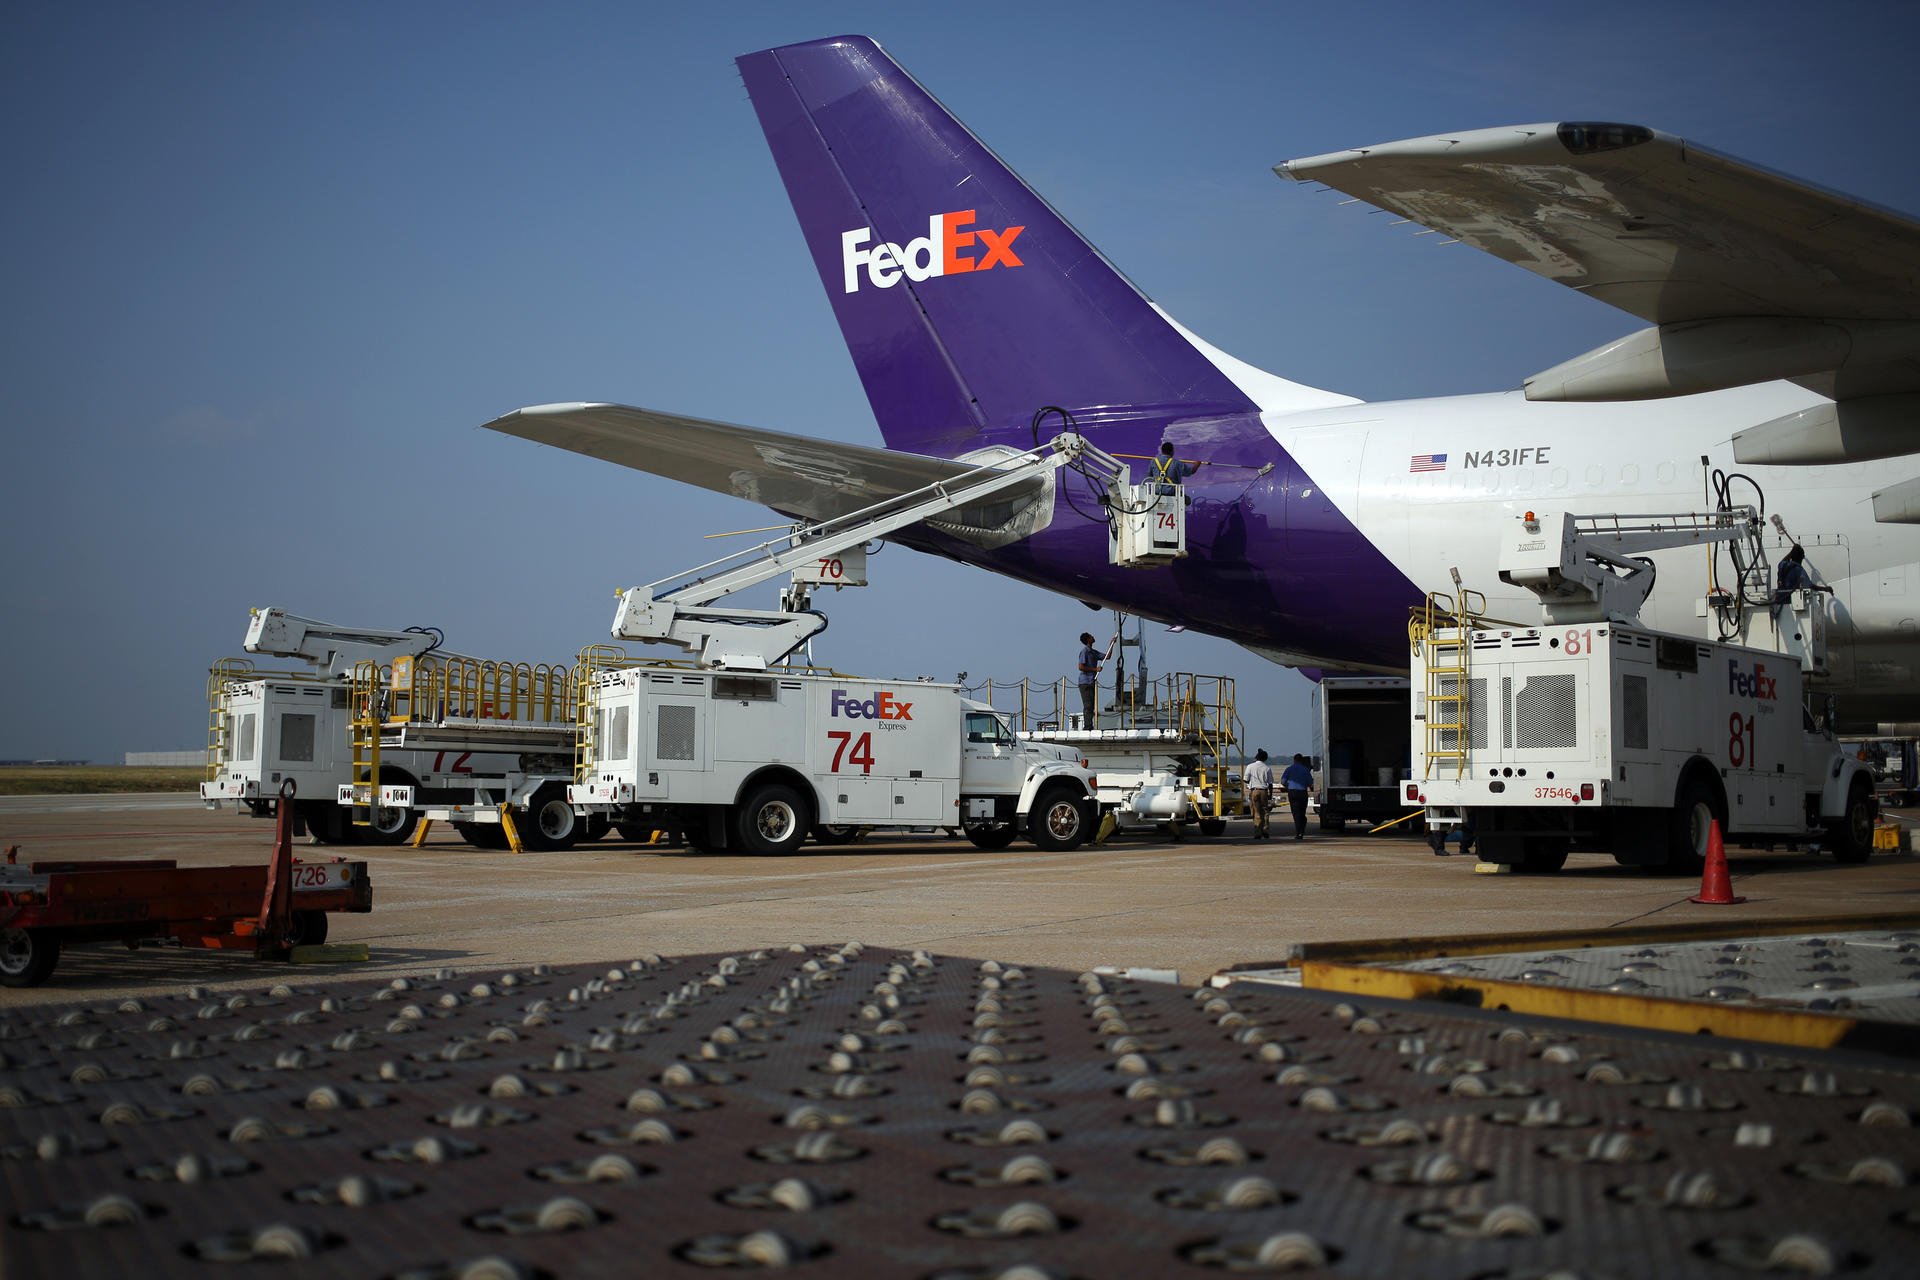 FedEx expects to move 22 million shipments on December 2, almost double the number on its busiest day six years ago.